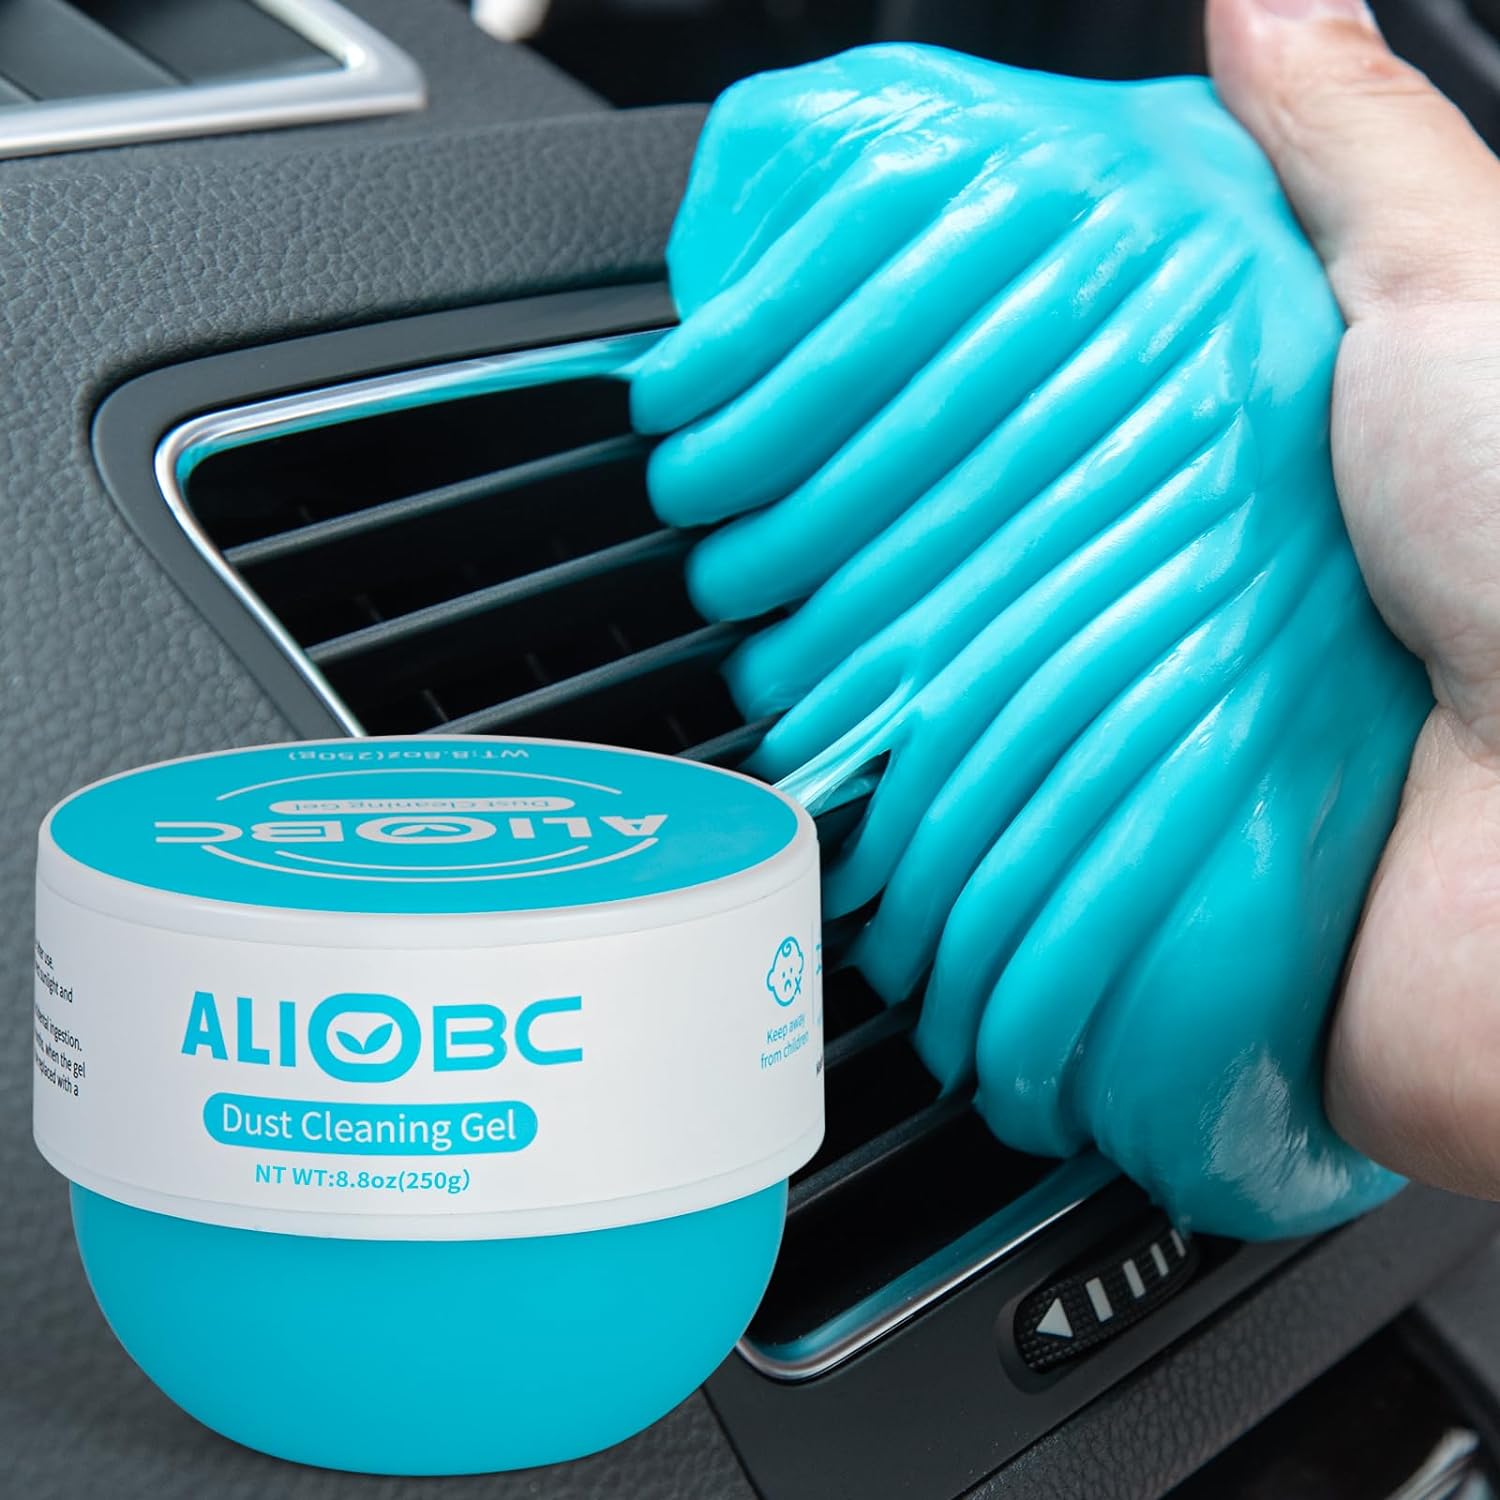 Gel works as expected. Easy to use; cleans dust and dirt from the vents, hard to reach areas like the coin and cup holder section of my car with no effort. Smells nice and gentle on skin.